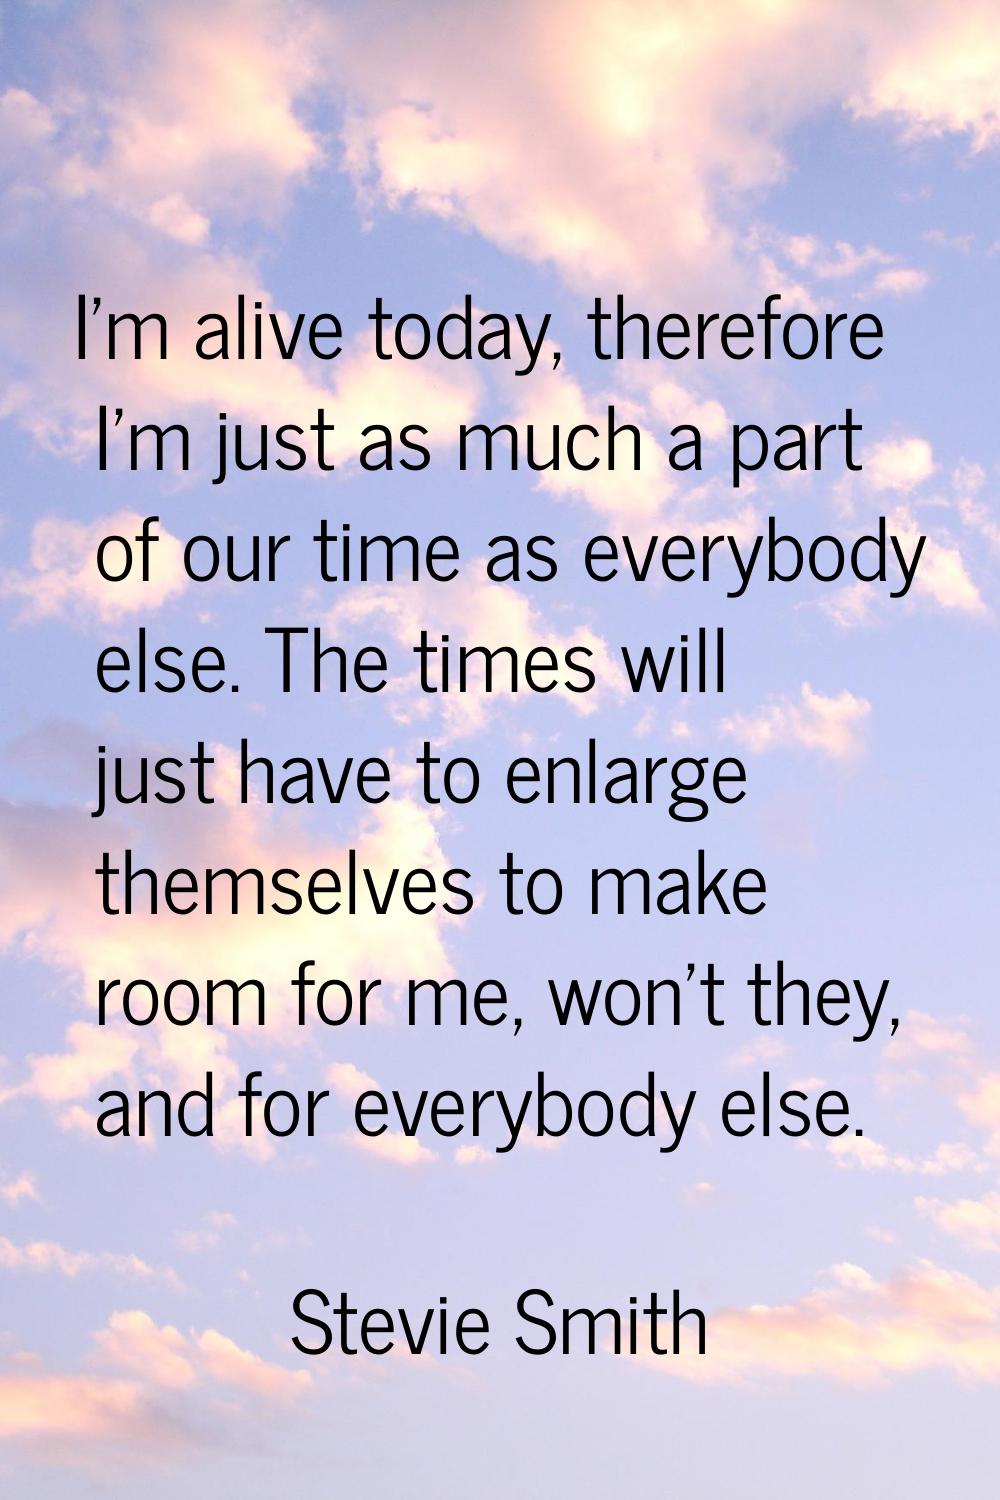 I'm alive today, therefore I'm just as much a part of our time as everybody else. The times will ju